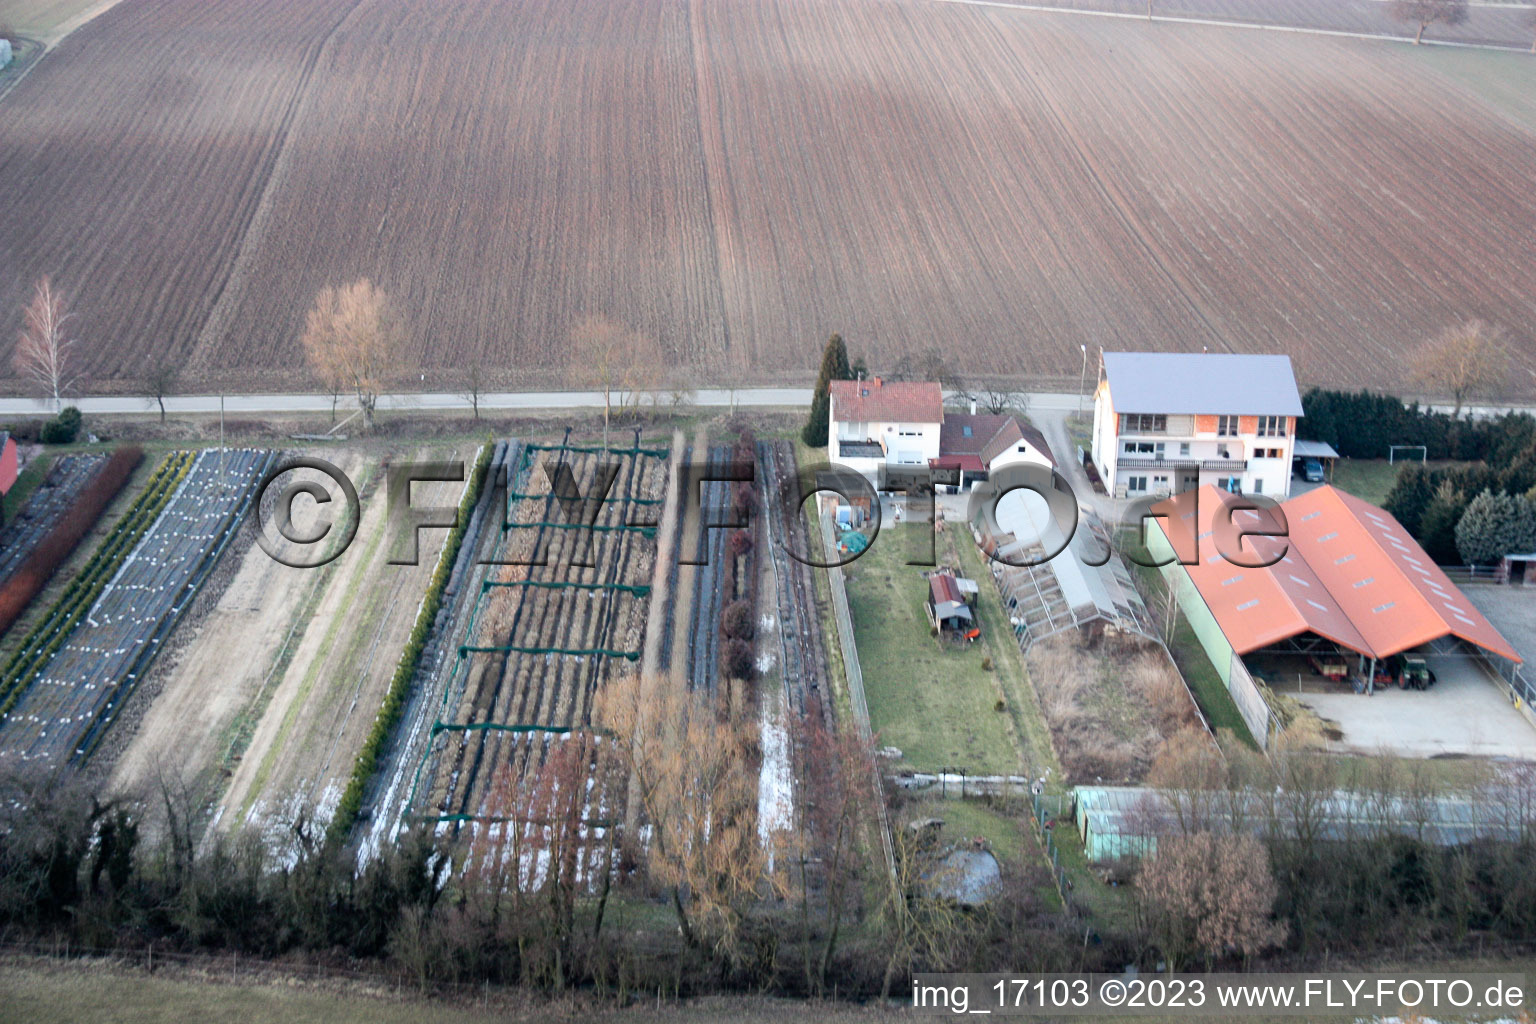 Aerial photograpy of Vollmersweiler in the state Rhineland-Palatinate, Germany